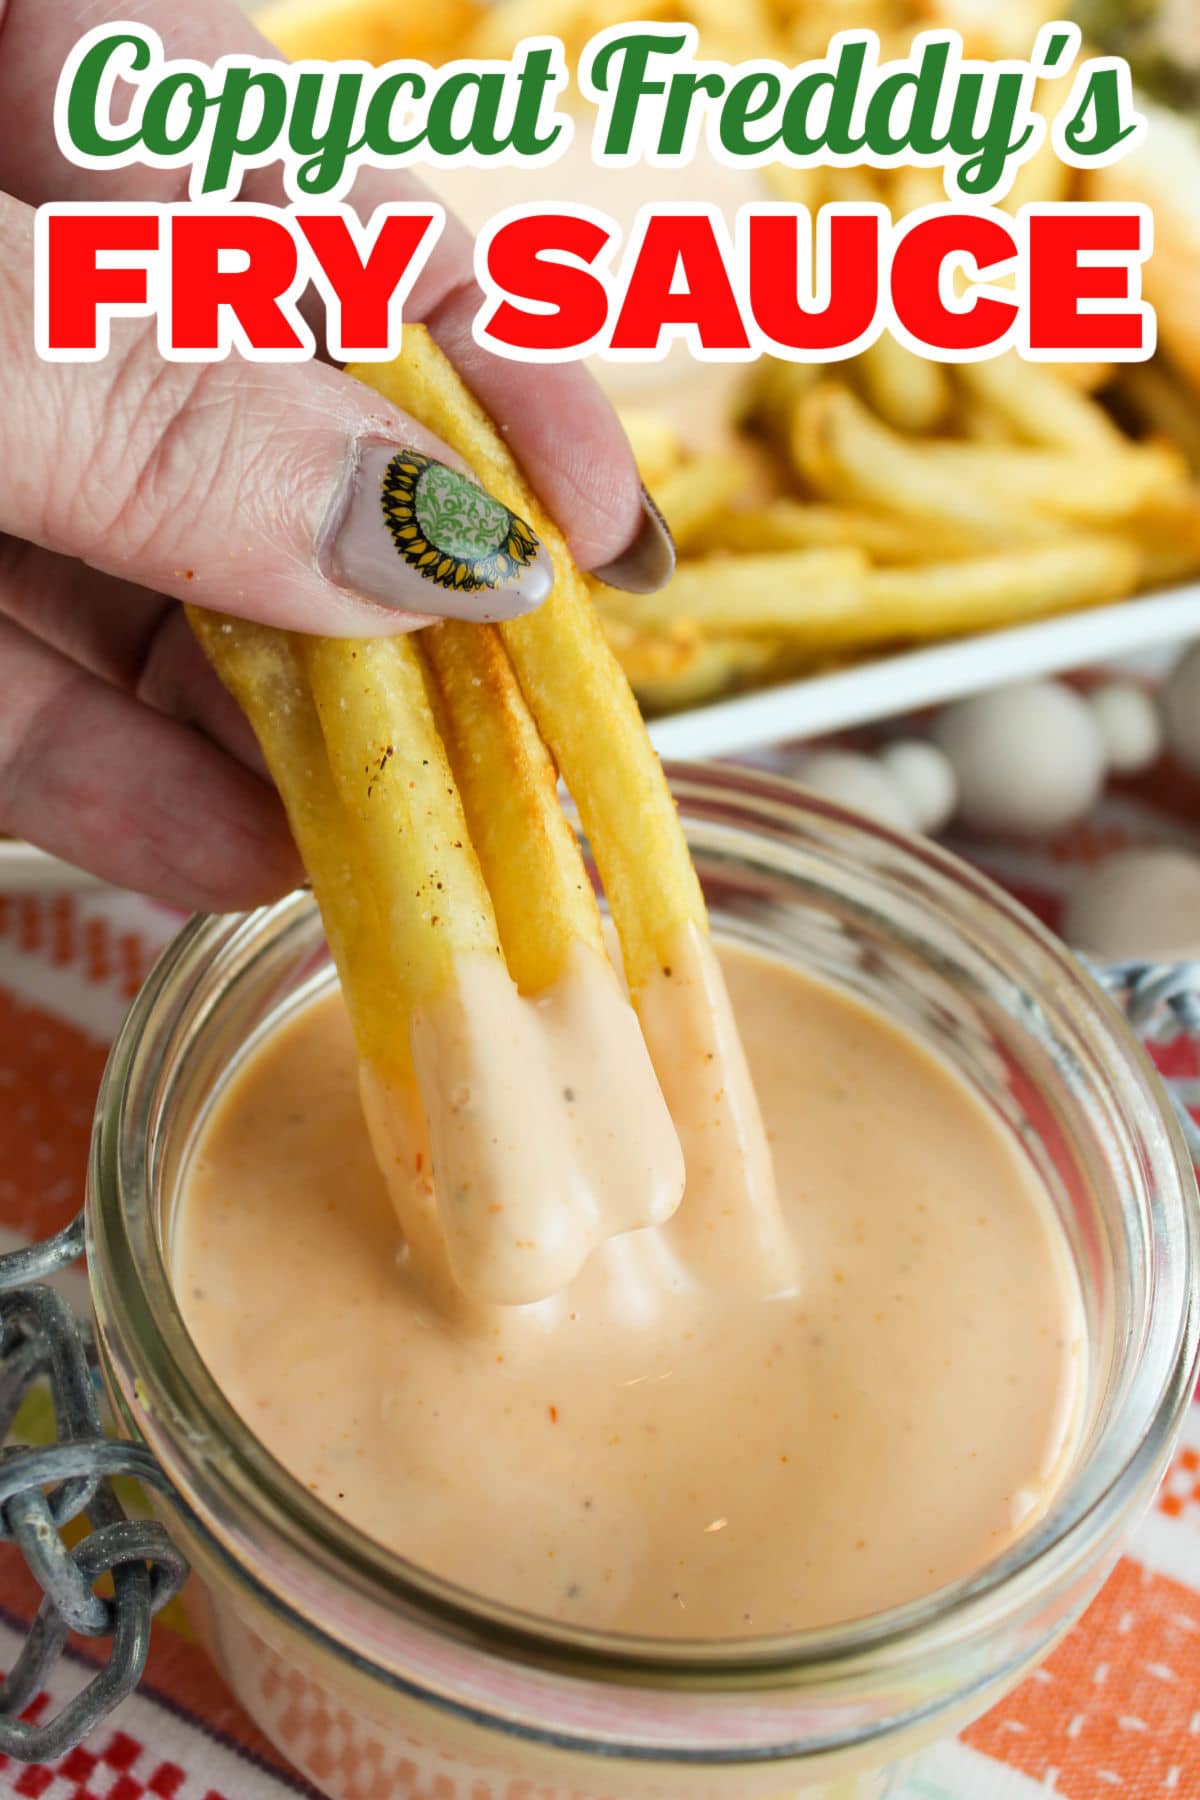 This Copycat Freddy's Fry Sauce is spot on and with only 4 ingredients - you'll be dippin fries in no time!  via @foodhussy